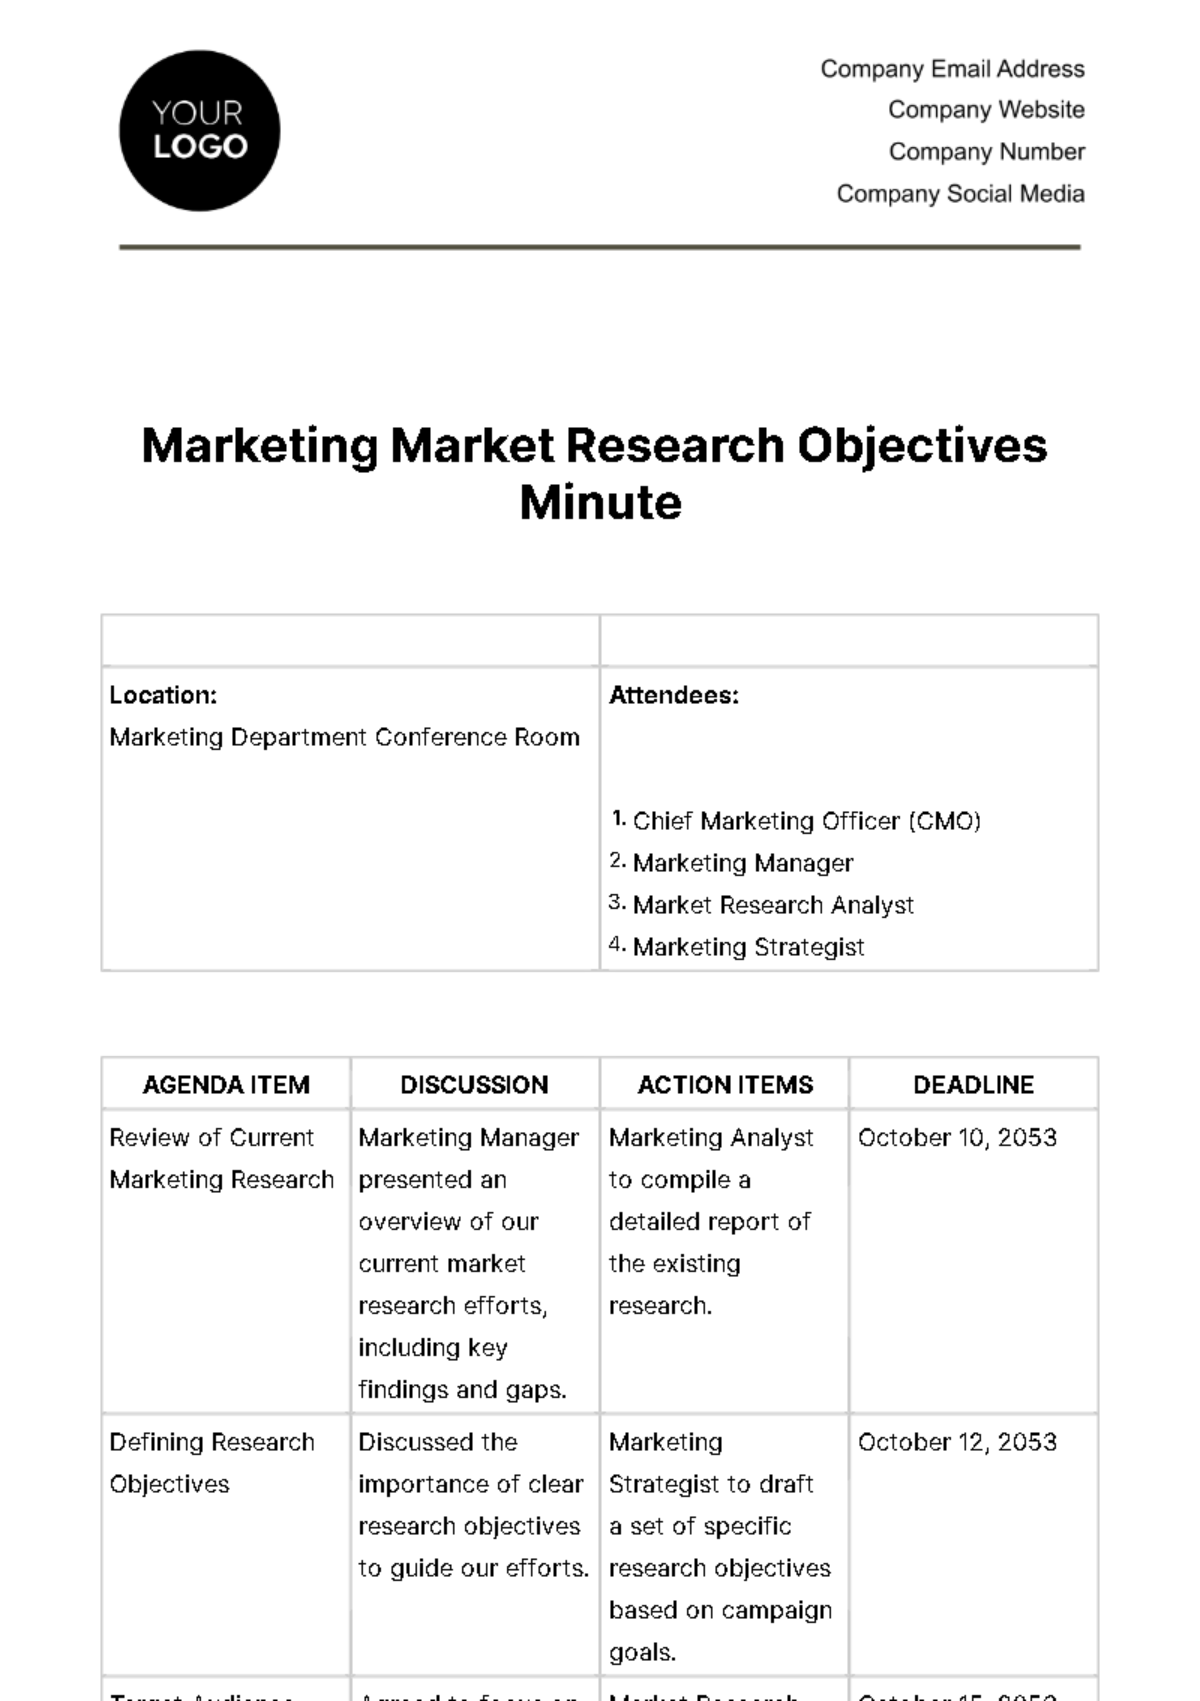 Free Marketing Market Research Objectives Minute Template